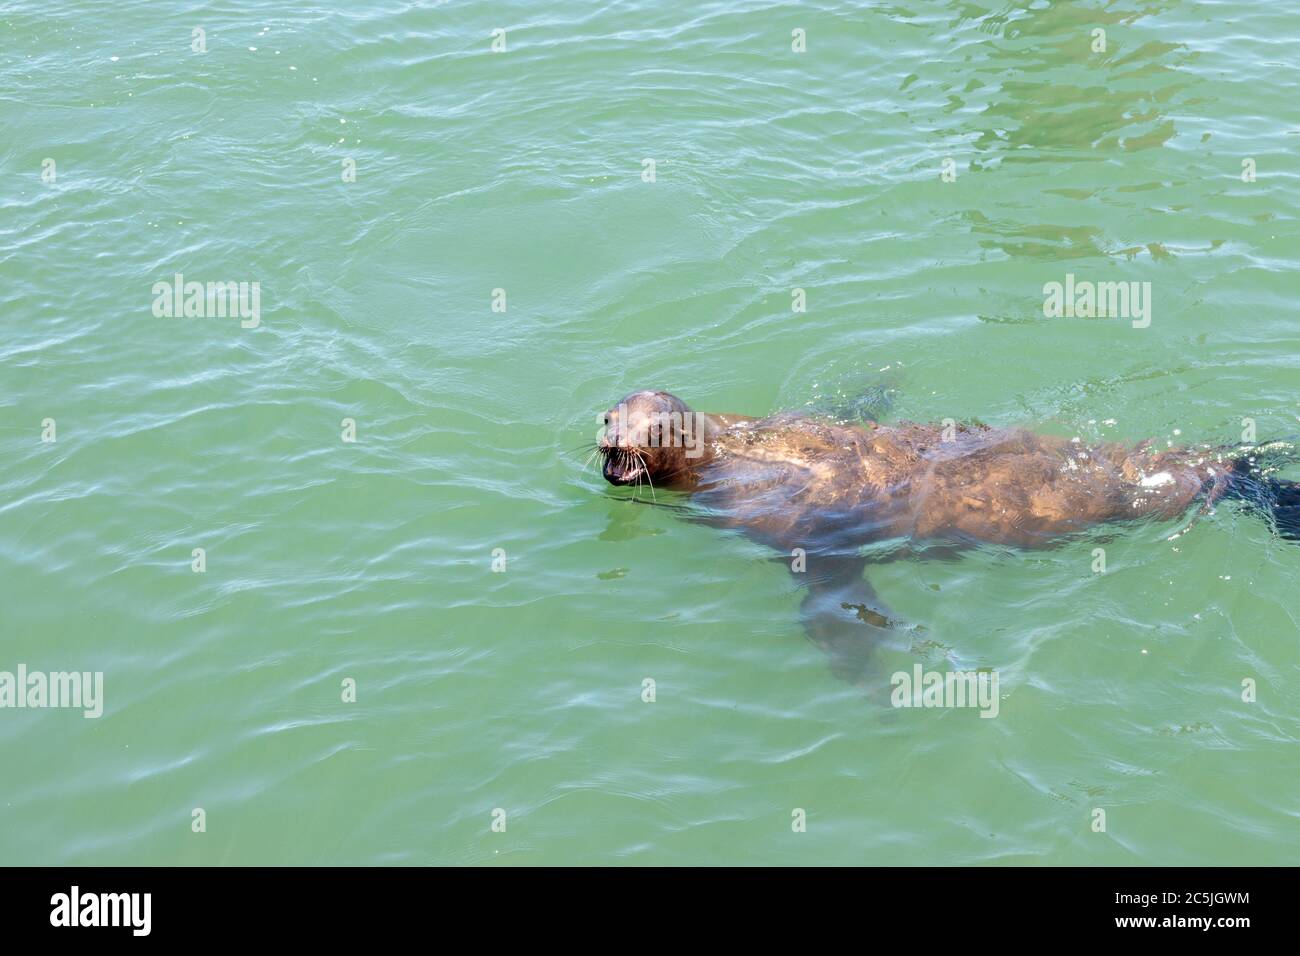 SAN FRANCISCO, CALIFORNIA, UNITED STATES - MAY 4, 2019: View of Sea Lions swimming off Pier 39 Stock Photo